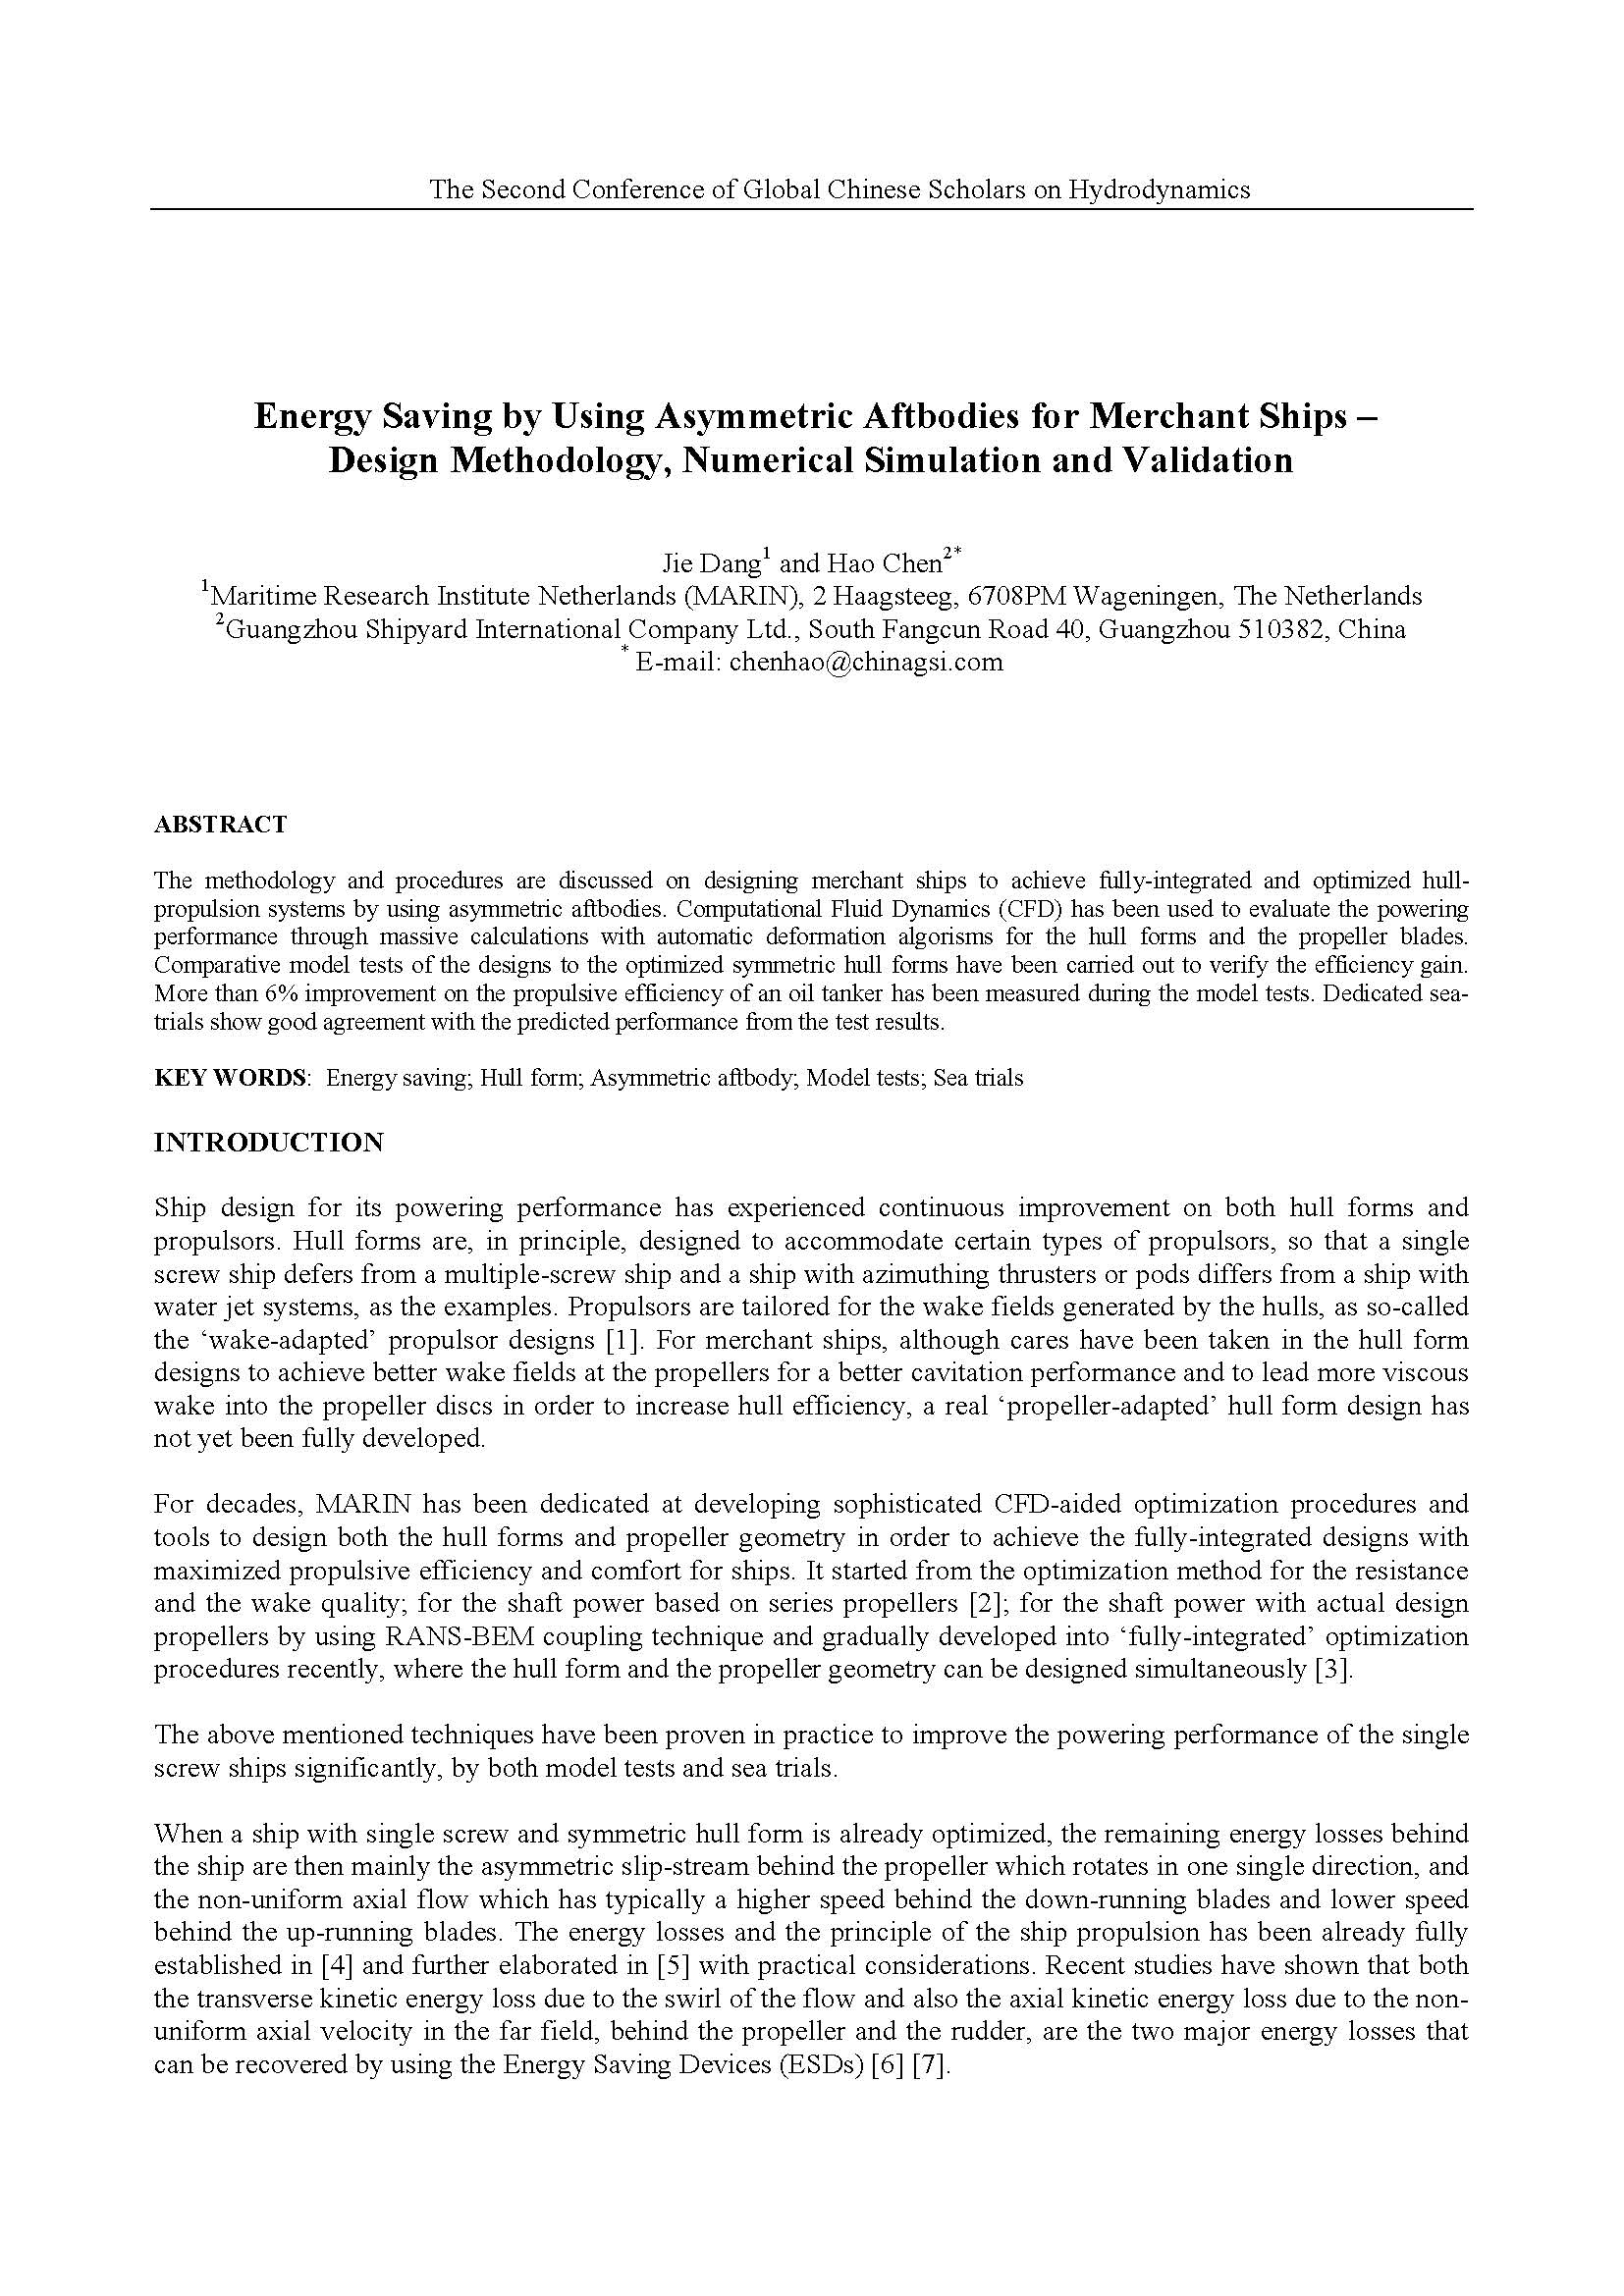 Energy Saving by Using Asymmetric Aftbodies for Merchant Ships – Design Methodology, Numerical Simulation and Validation